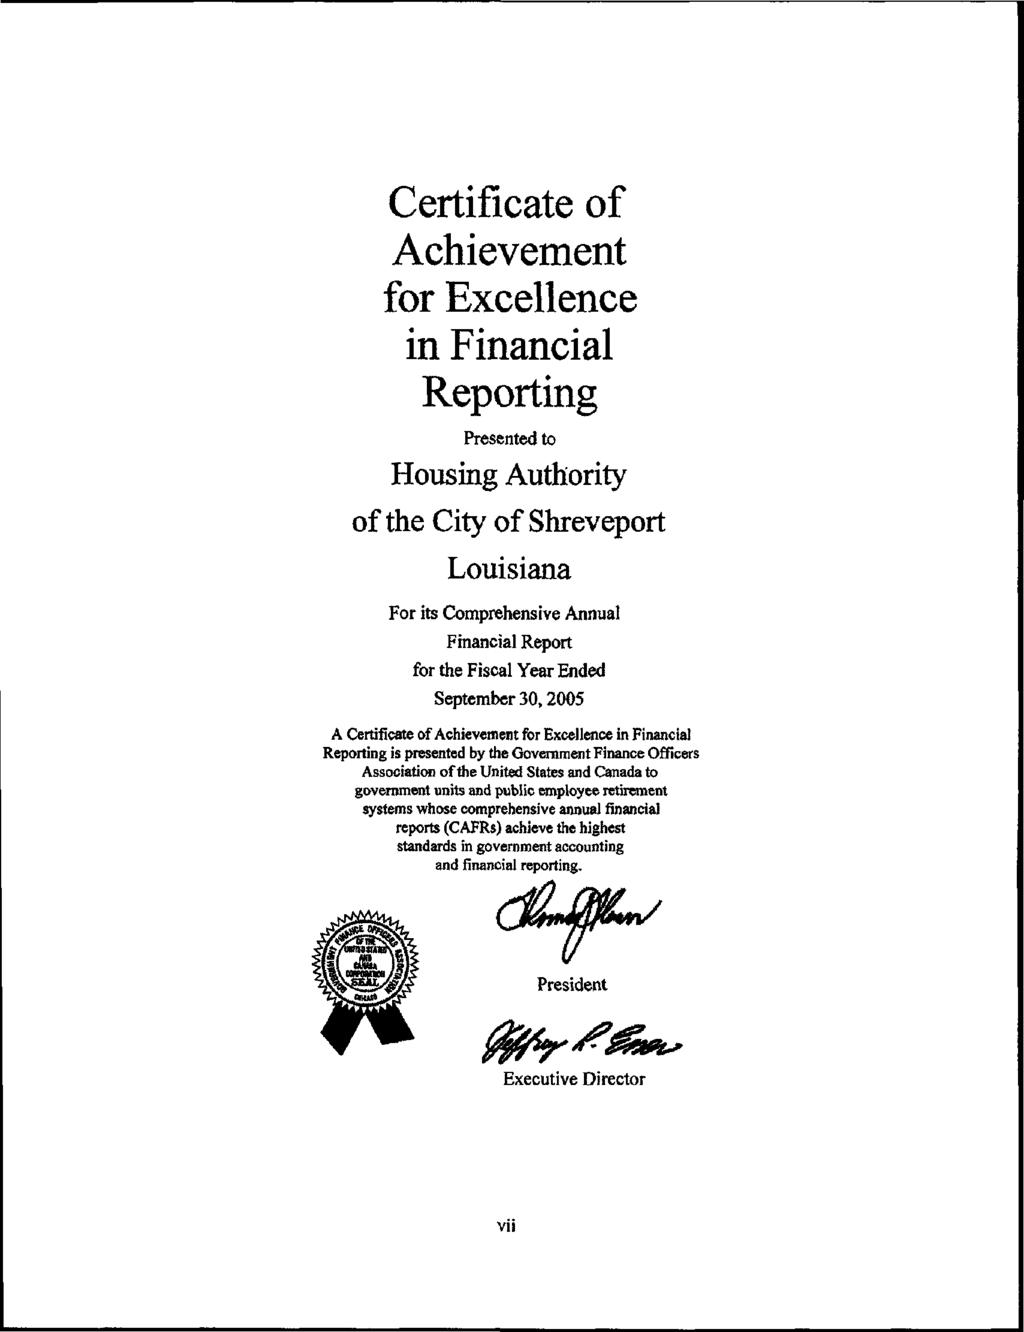 Certificate of Achievement for Excellence in Financial Reporting Presented to Housing Authority of the City of Shreveport Louisiana For its Comprehensive Annual Financial Report for the Fiscal Year